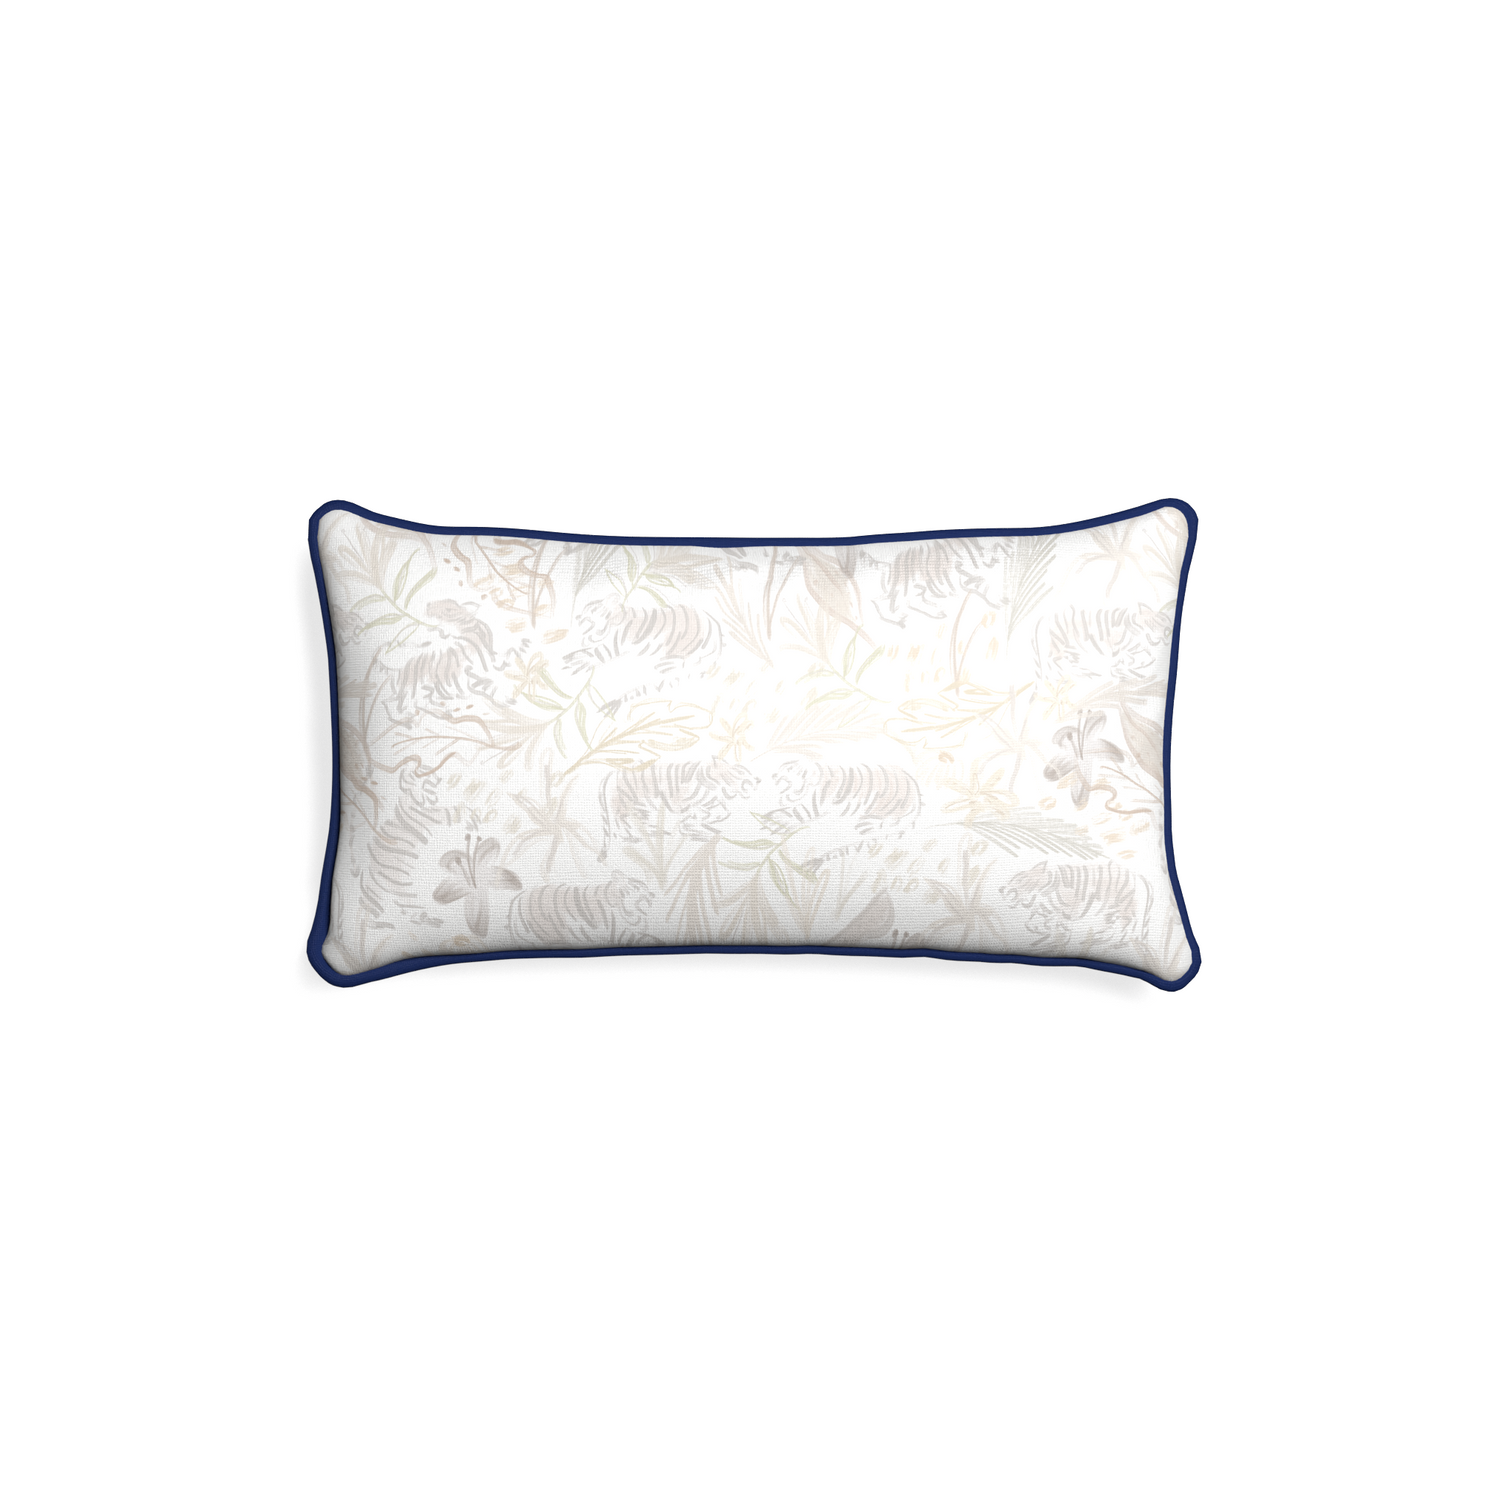 Petite-lumbar frida sand custom beige chinoiserie tigerpillow with midnight piping on white background